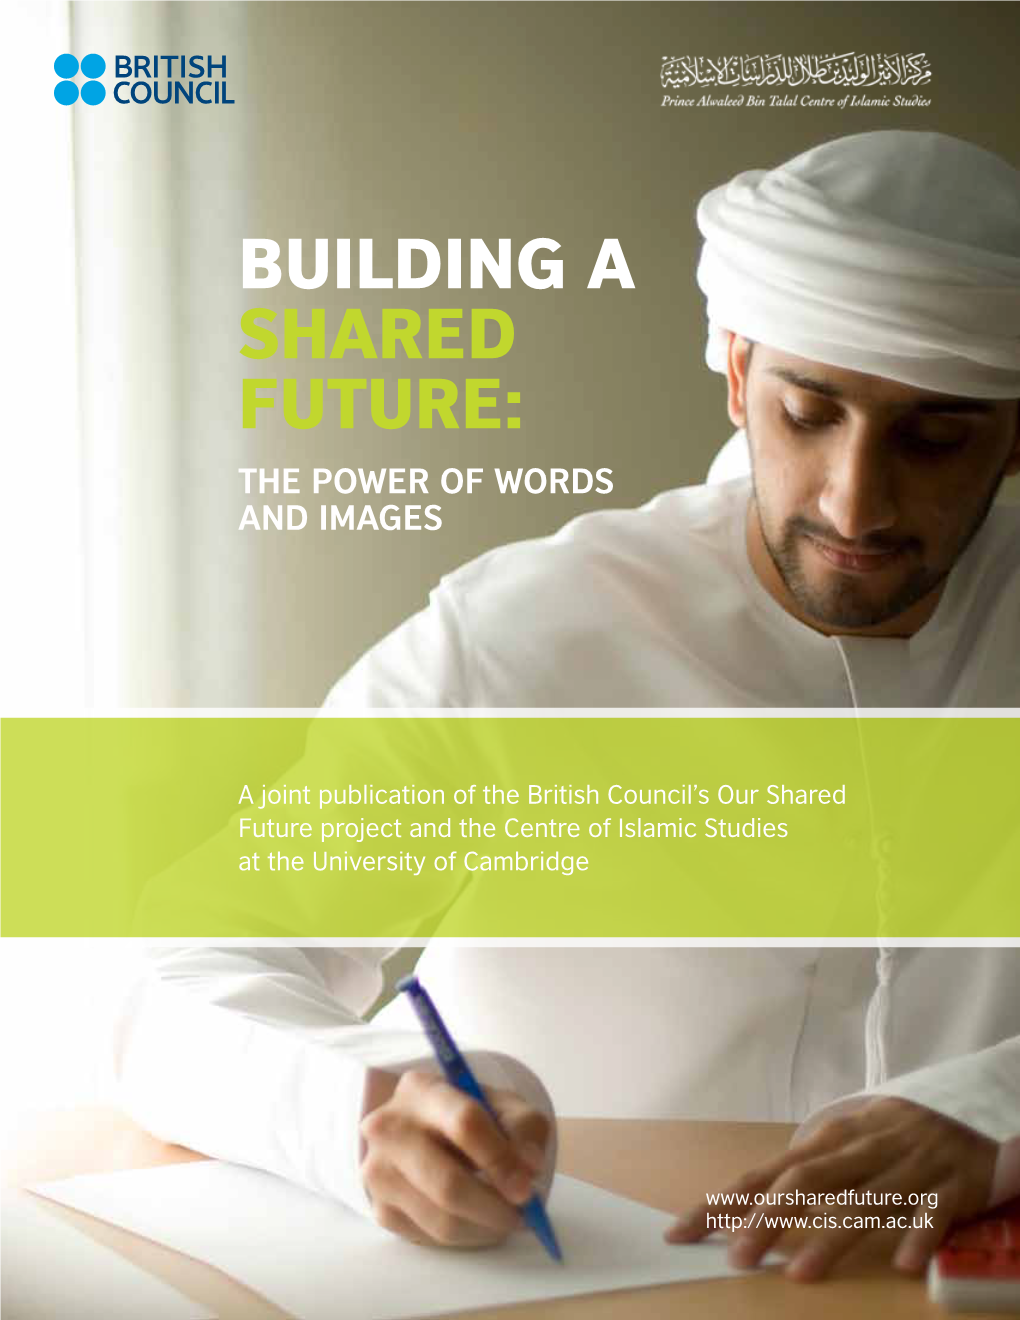 Building a Shared Future: the Power of Words and Images